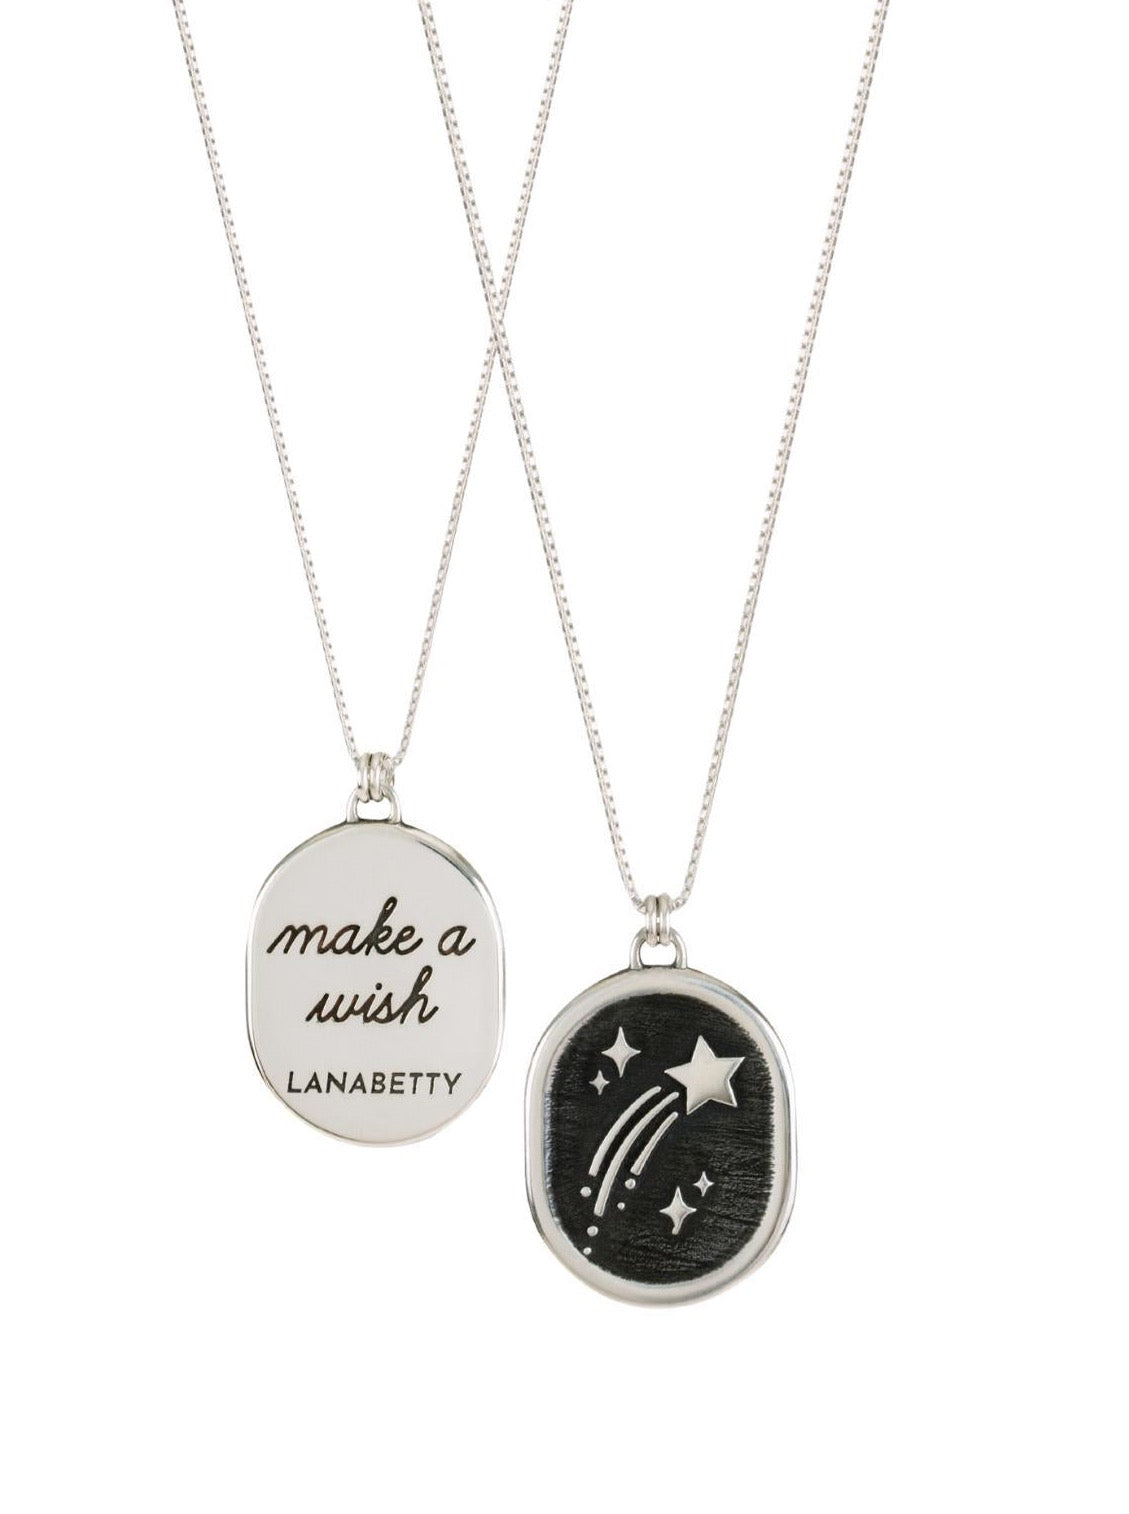 Make A Wish Sterling Silver Mantra Necklace with 20" chain by Lanabetty